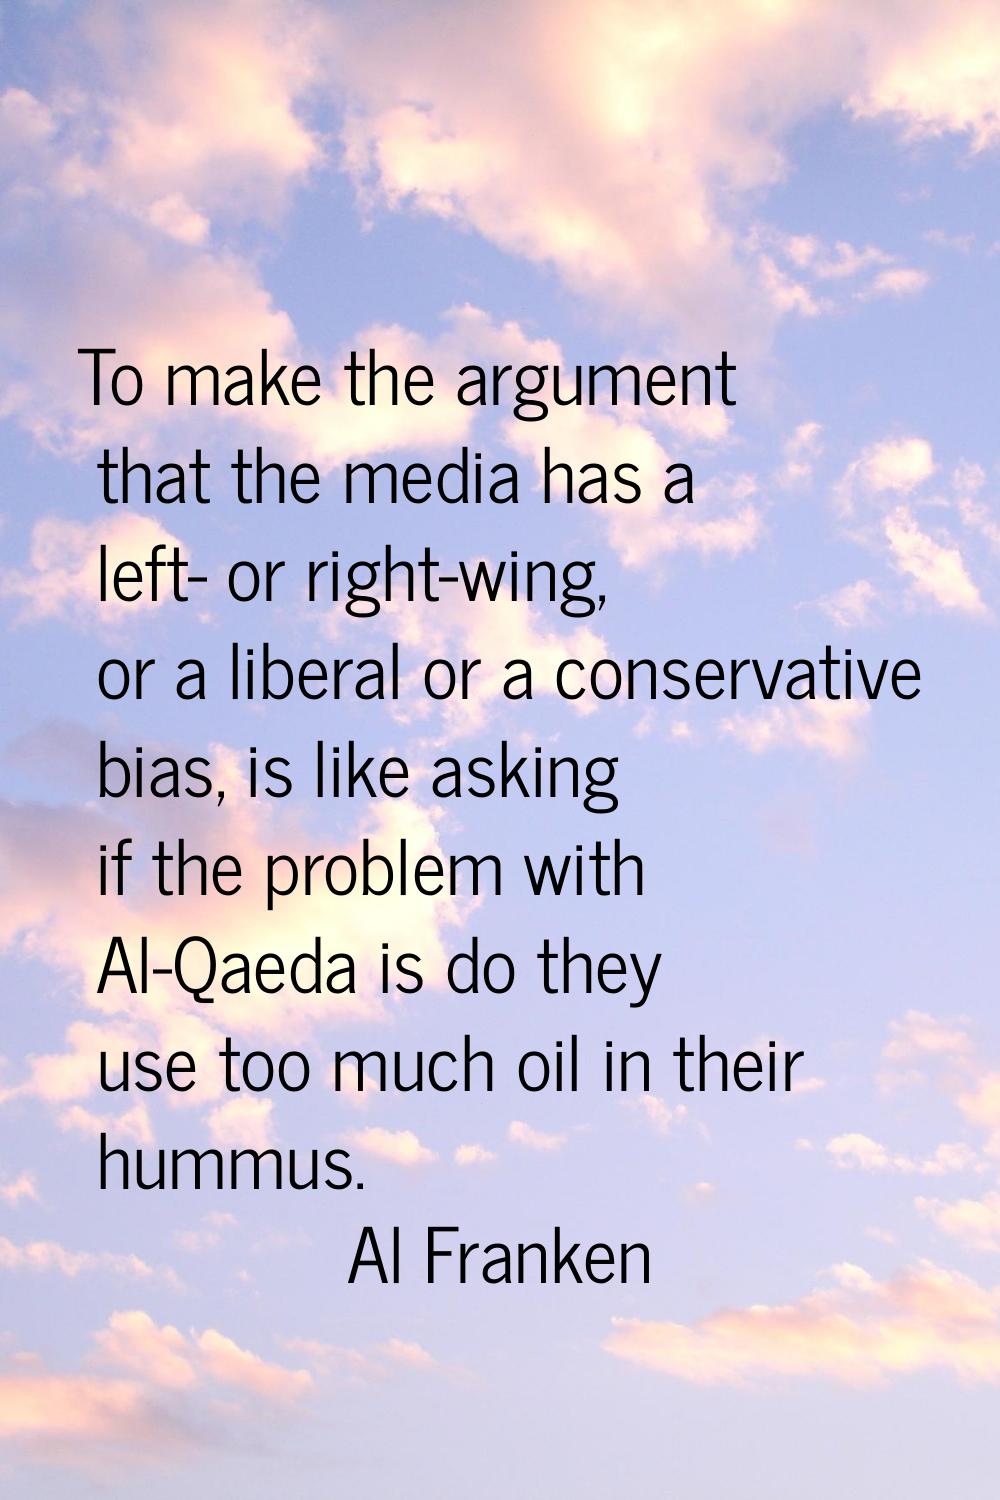 To make the argument that the media has a left- or right-wing, or a liberal or a conservative bias,